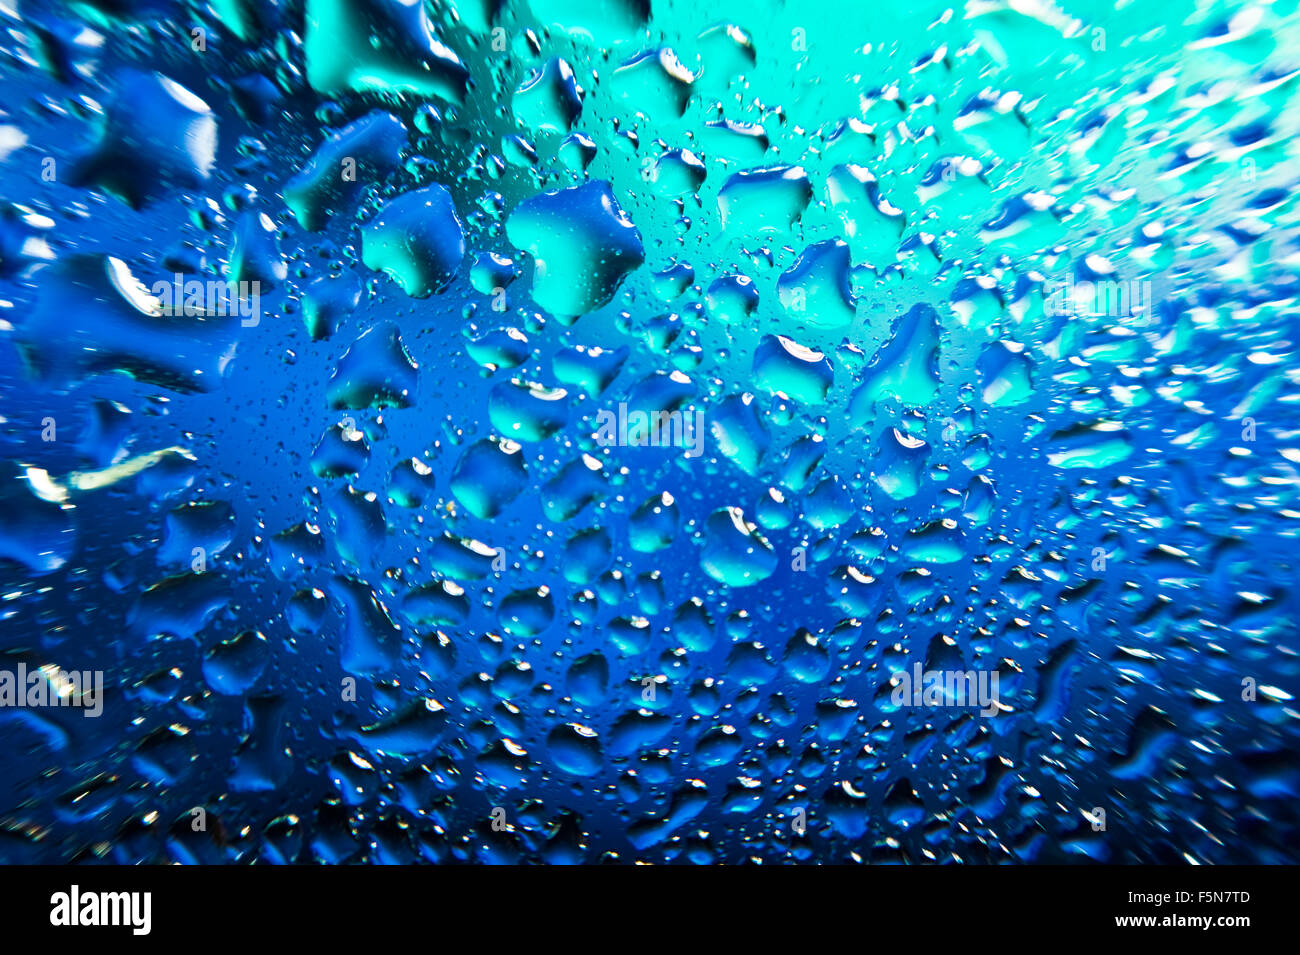 Abstract, blue color background with water drops. Stock Photo